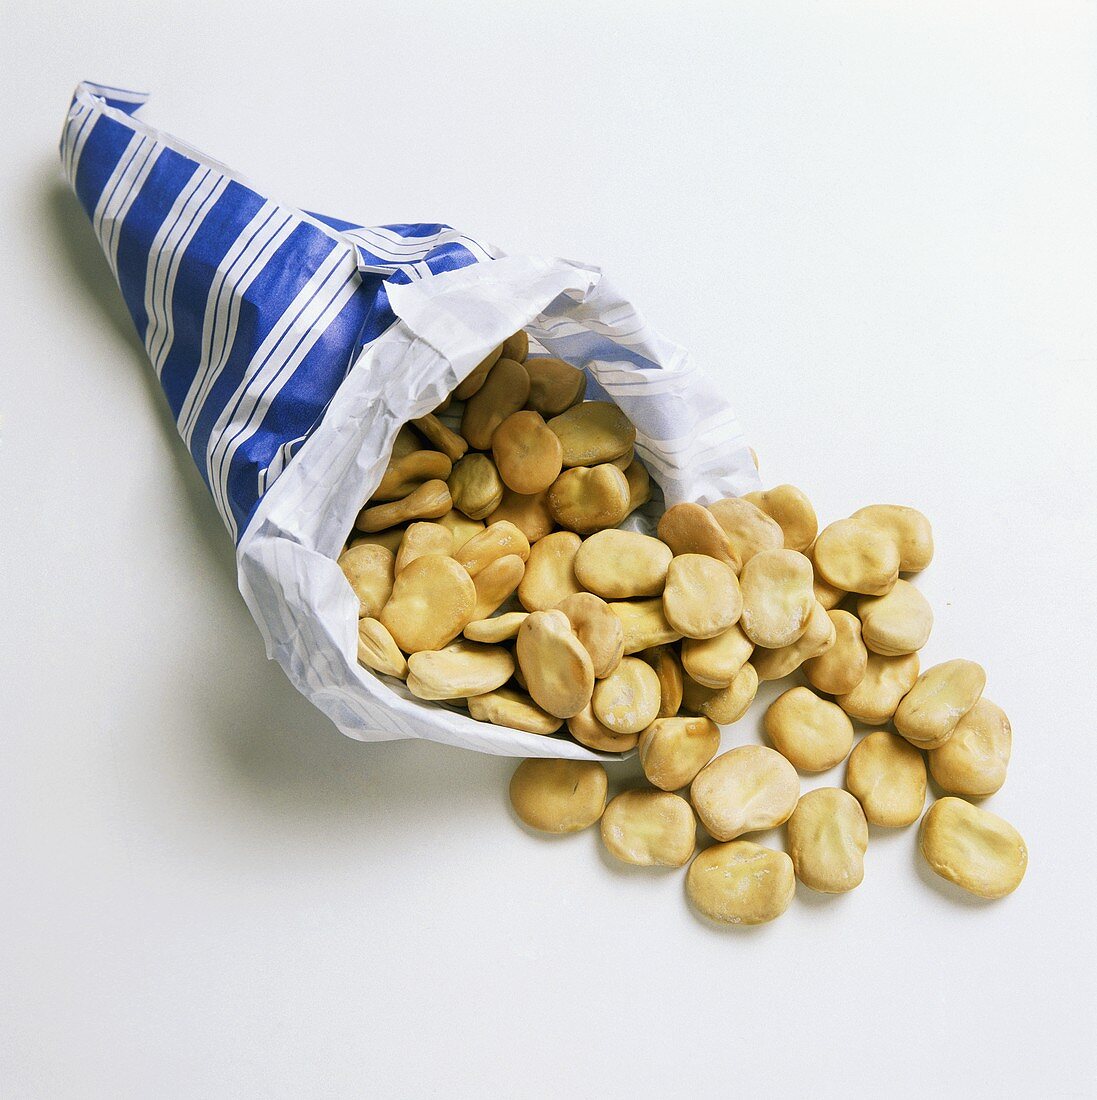 Broad beans falling out of paper bag